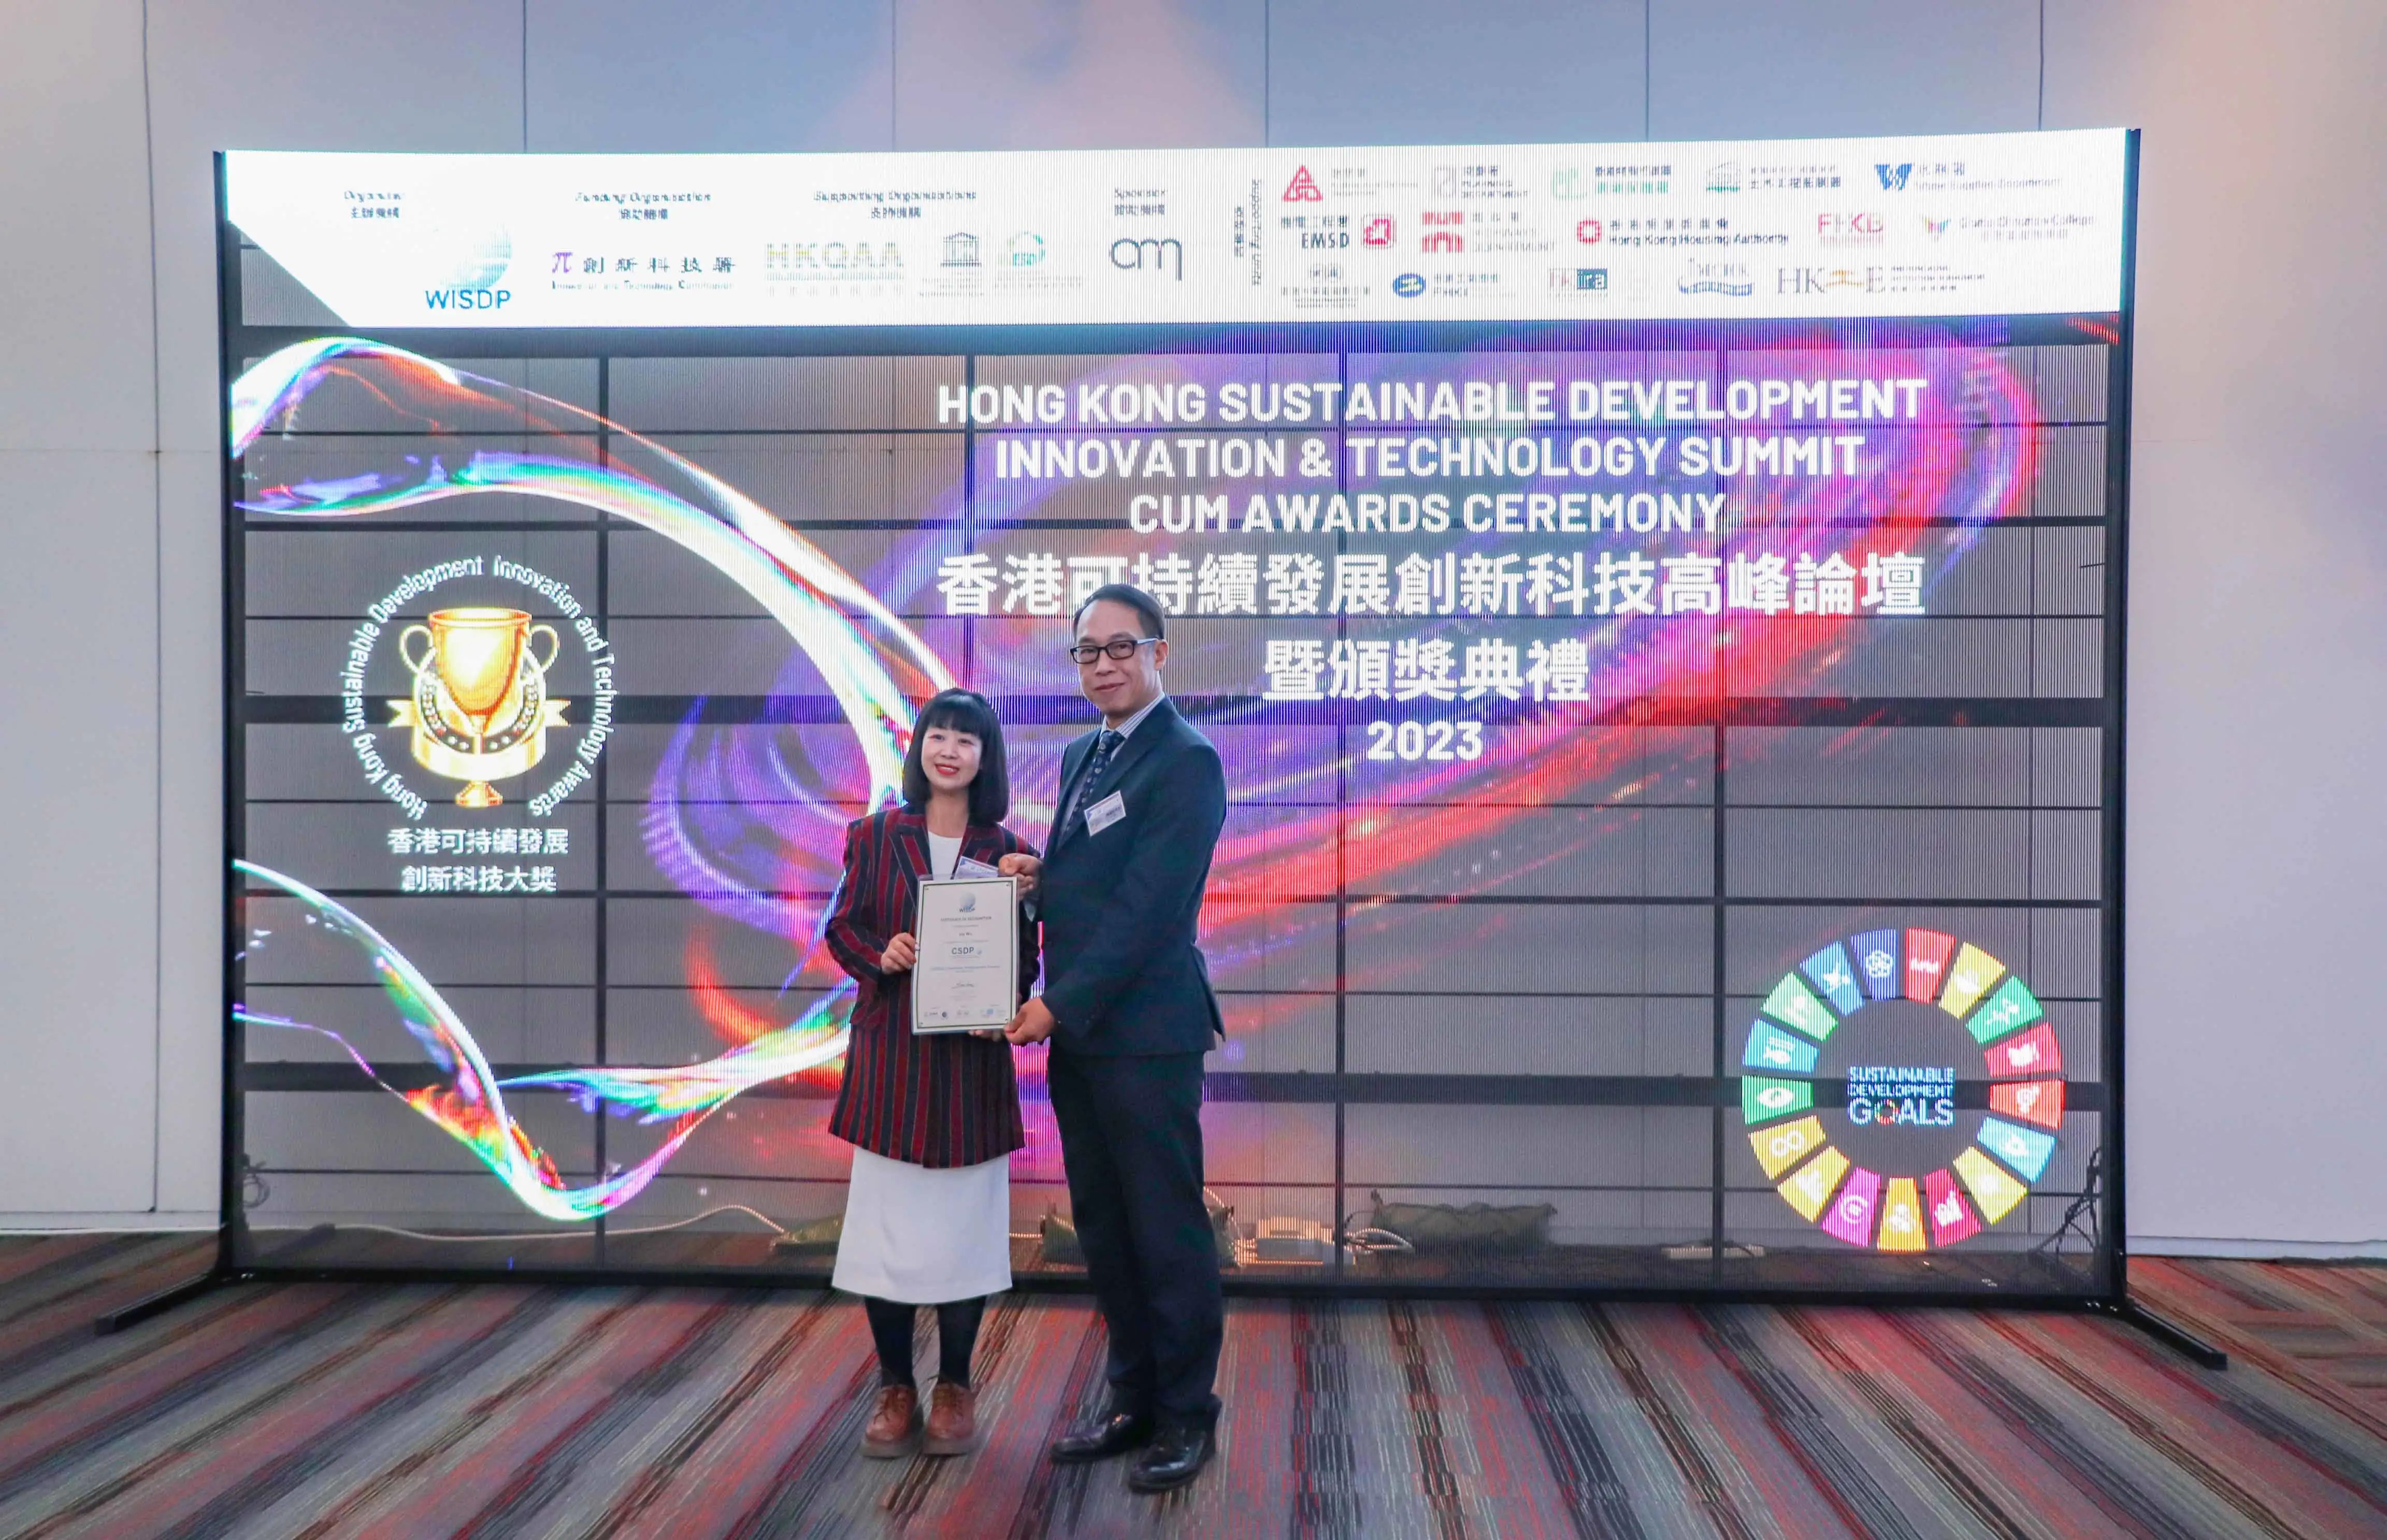 Awarded the Hong Kong Sustainable Development Innovation Technology Award, Sharing the Path to Corporate Success